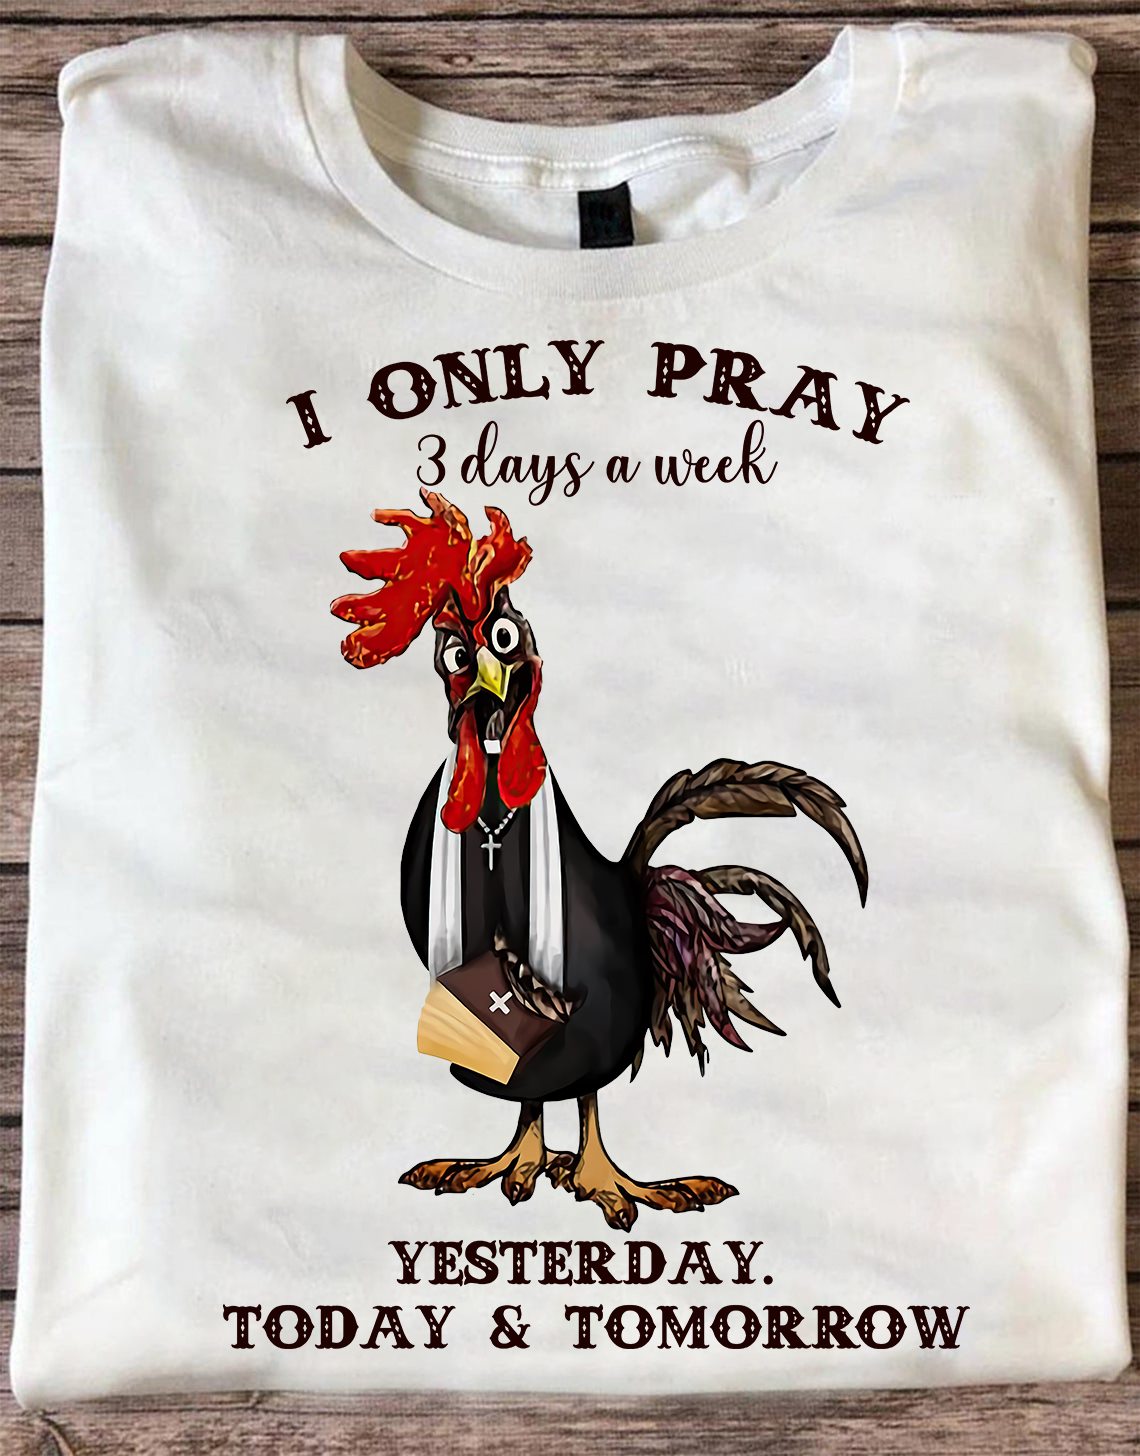 I only pray 3 days a week yesterday, today and tomorrow - Grumpy chicken, chicken with bible